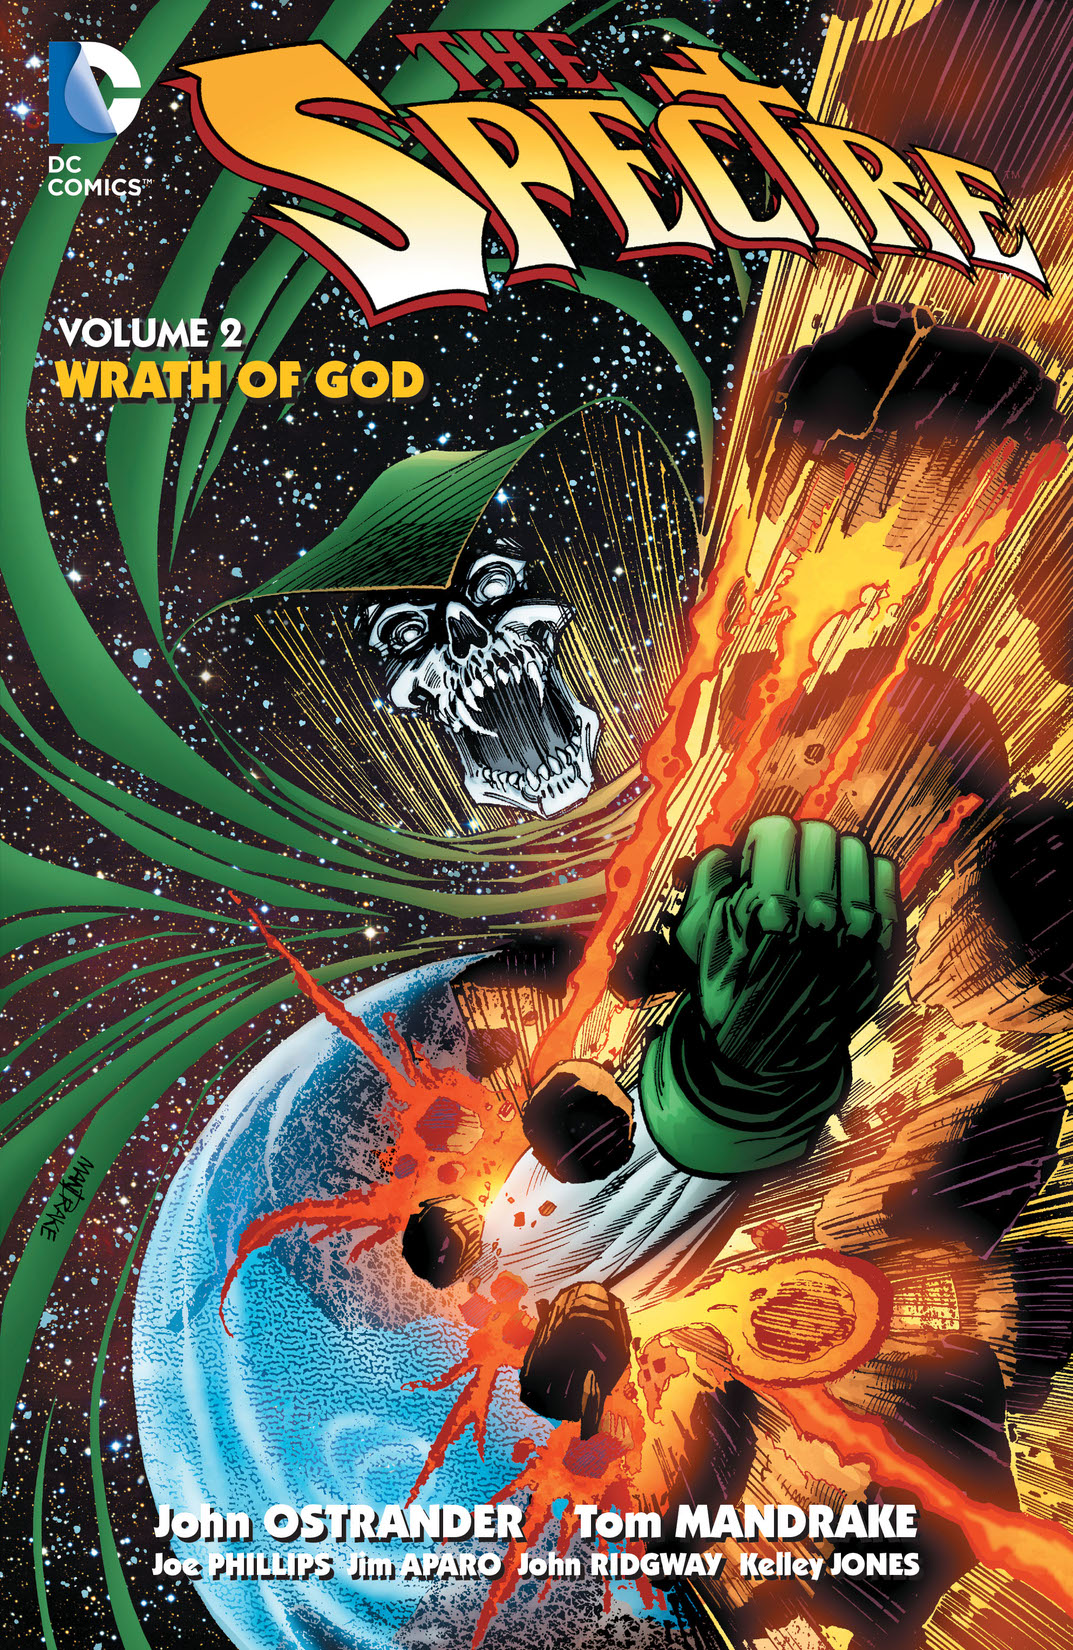 The Spectre Vol. 2: Wrath of God preview images